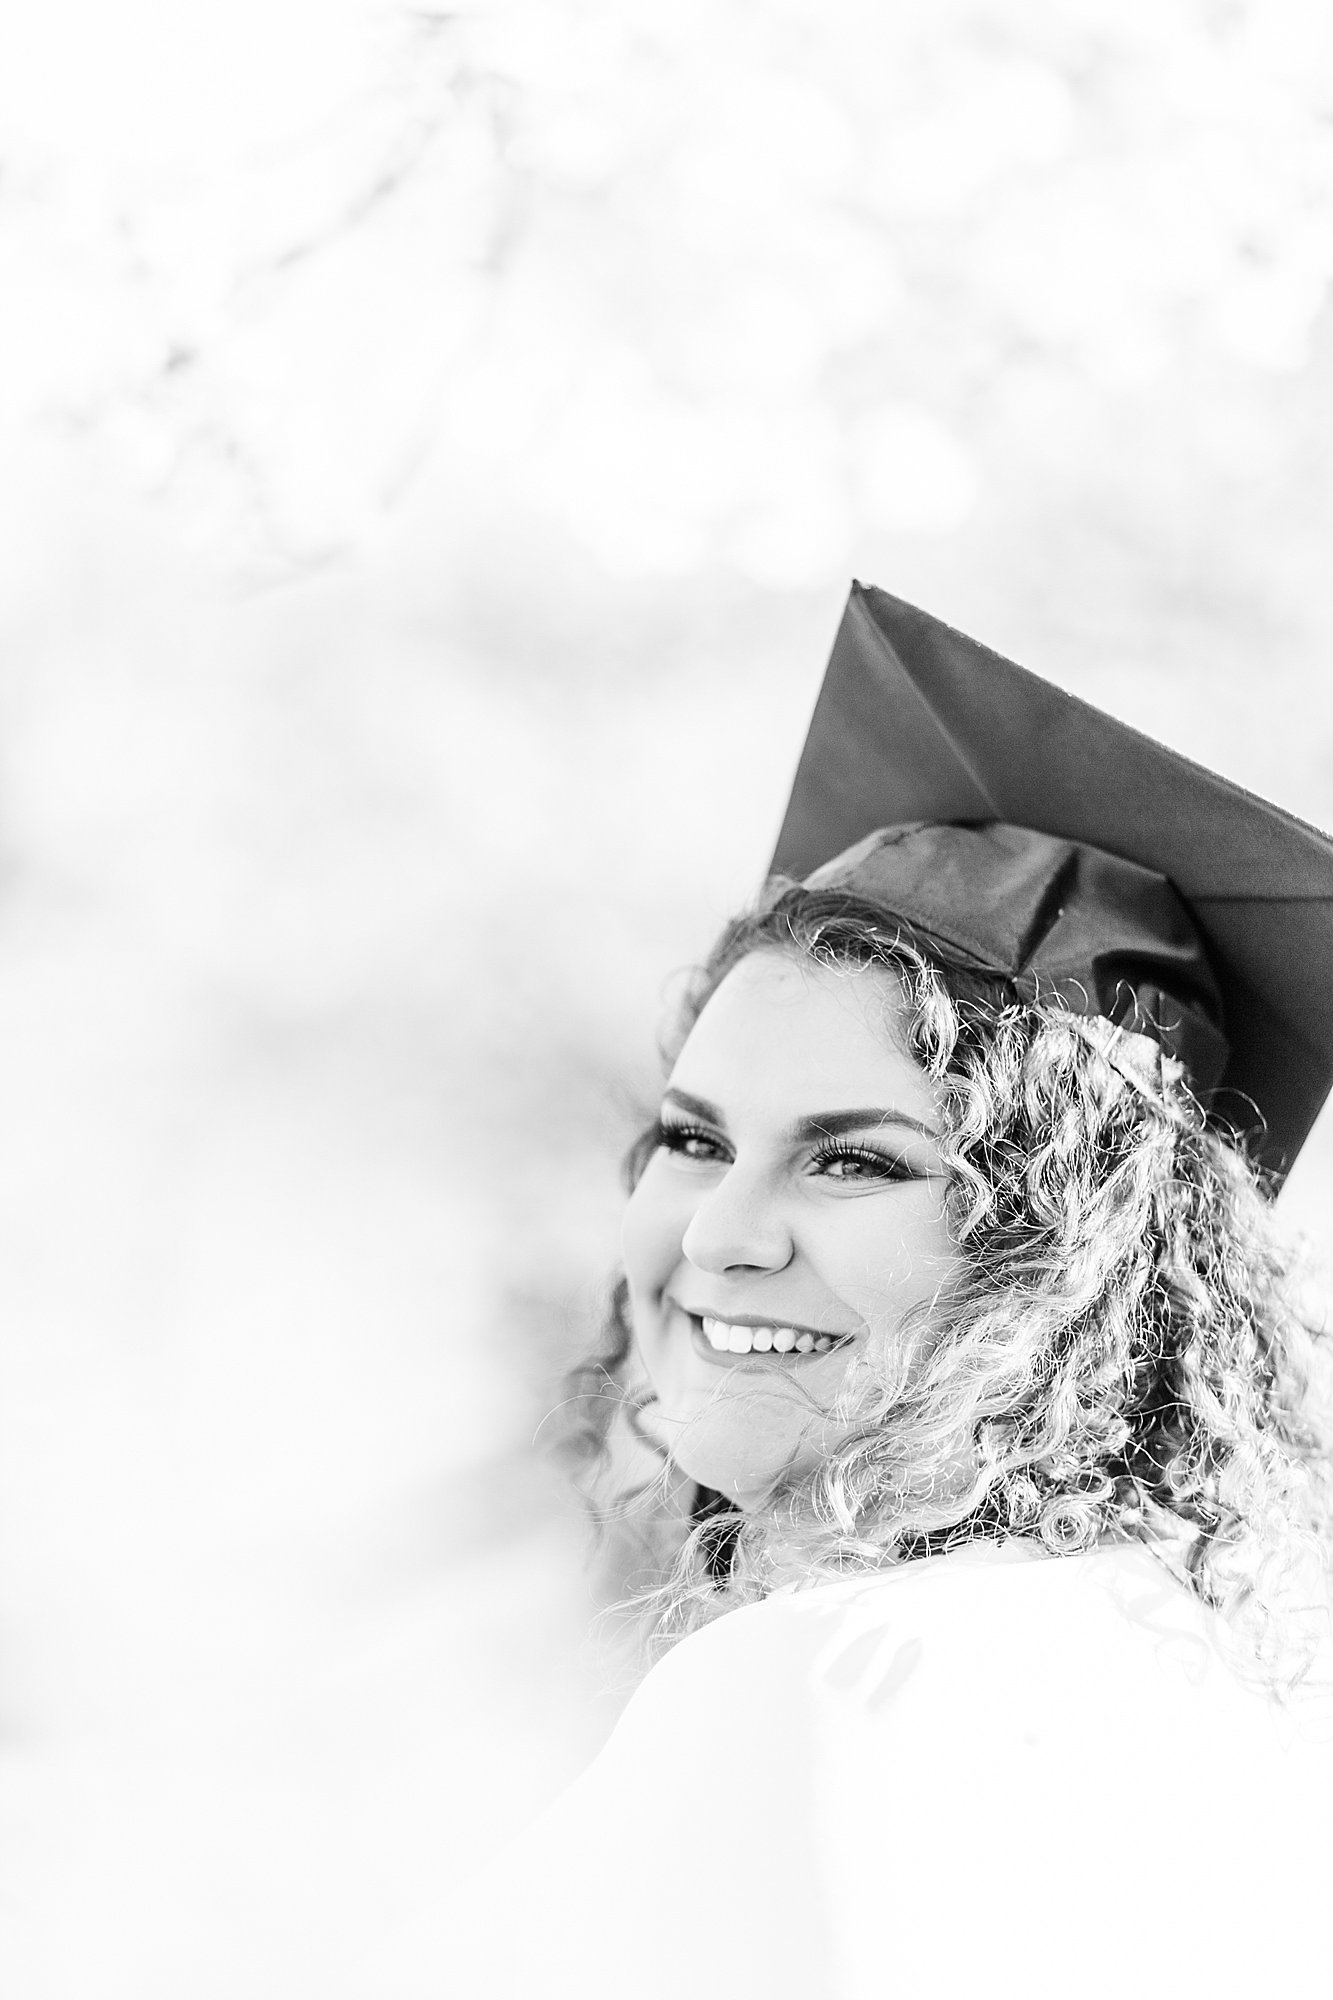 Black and white graduation photo in Spring.